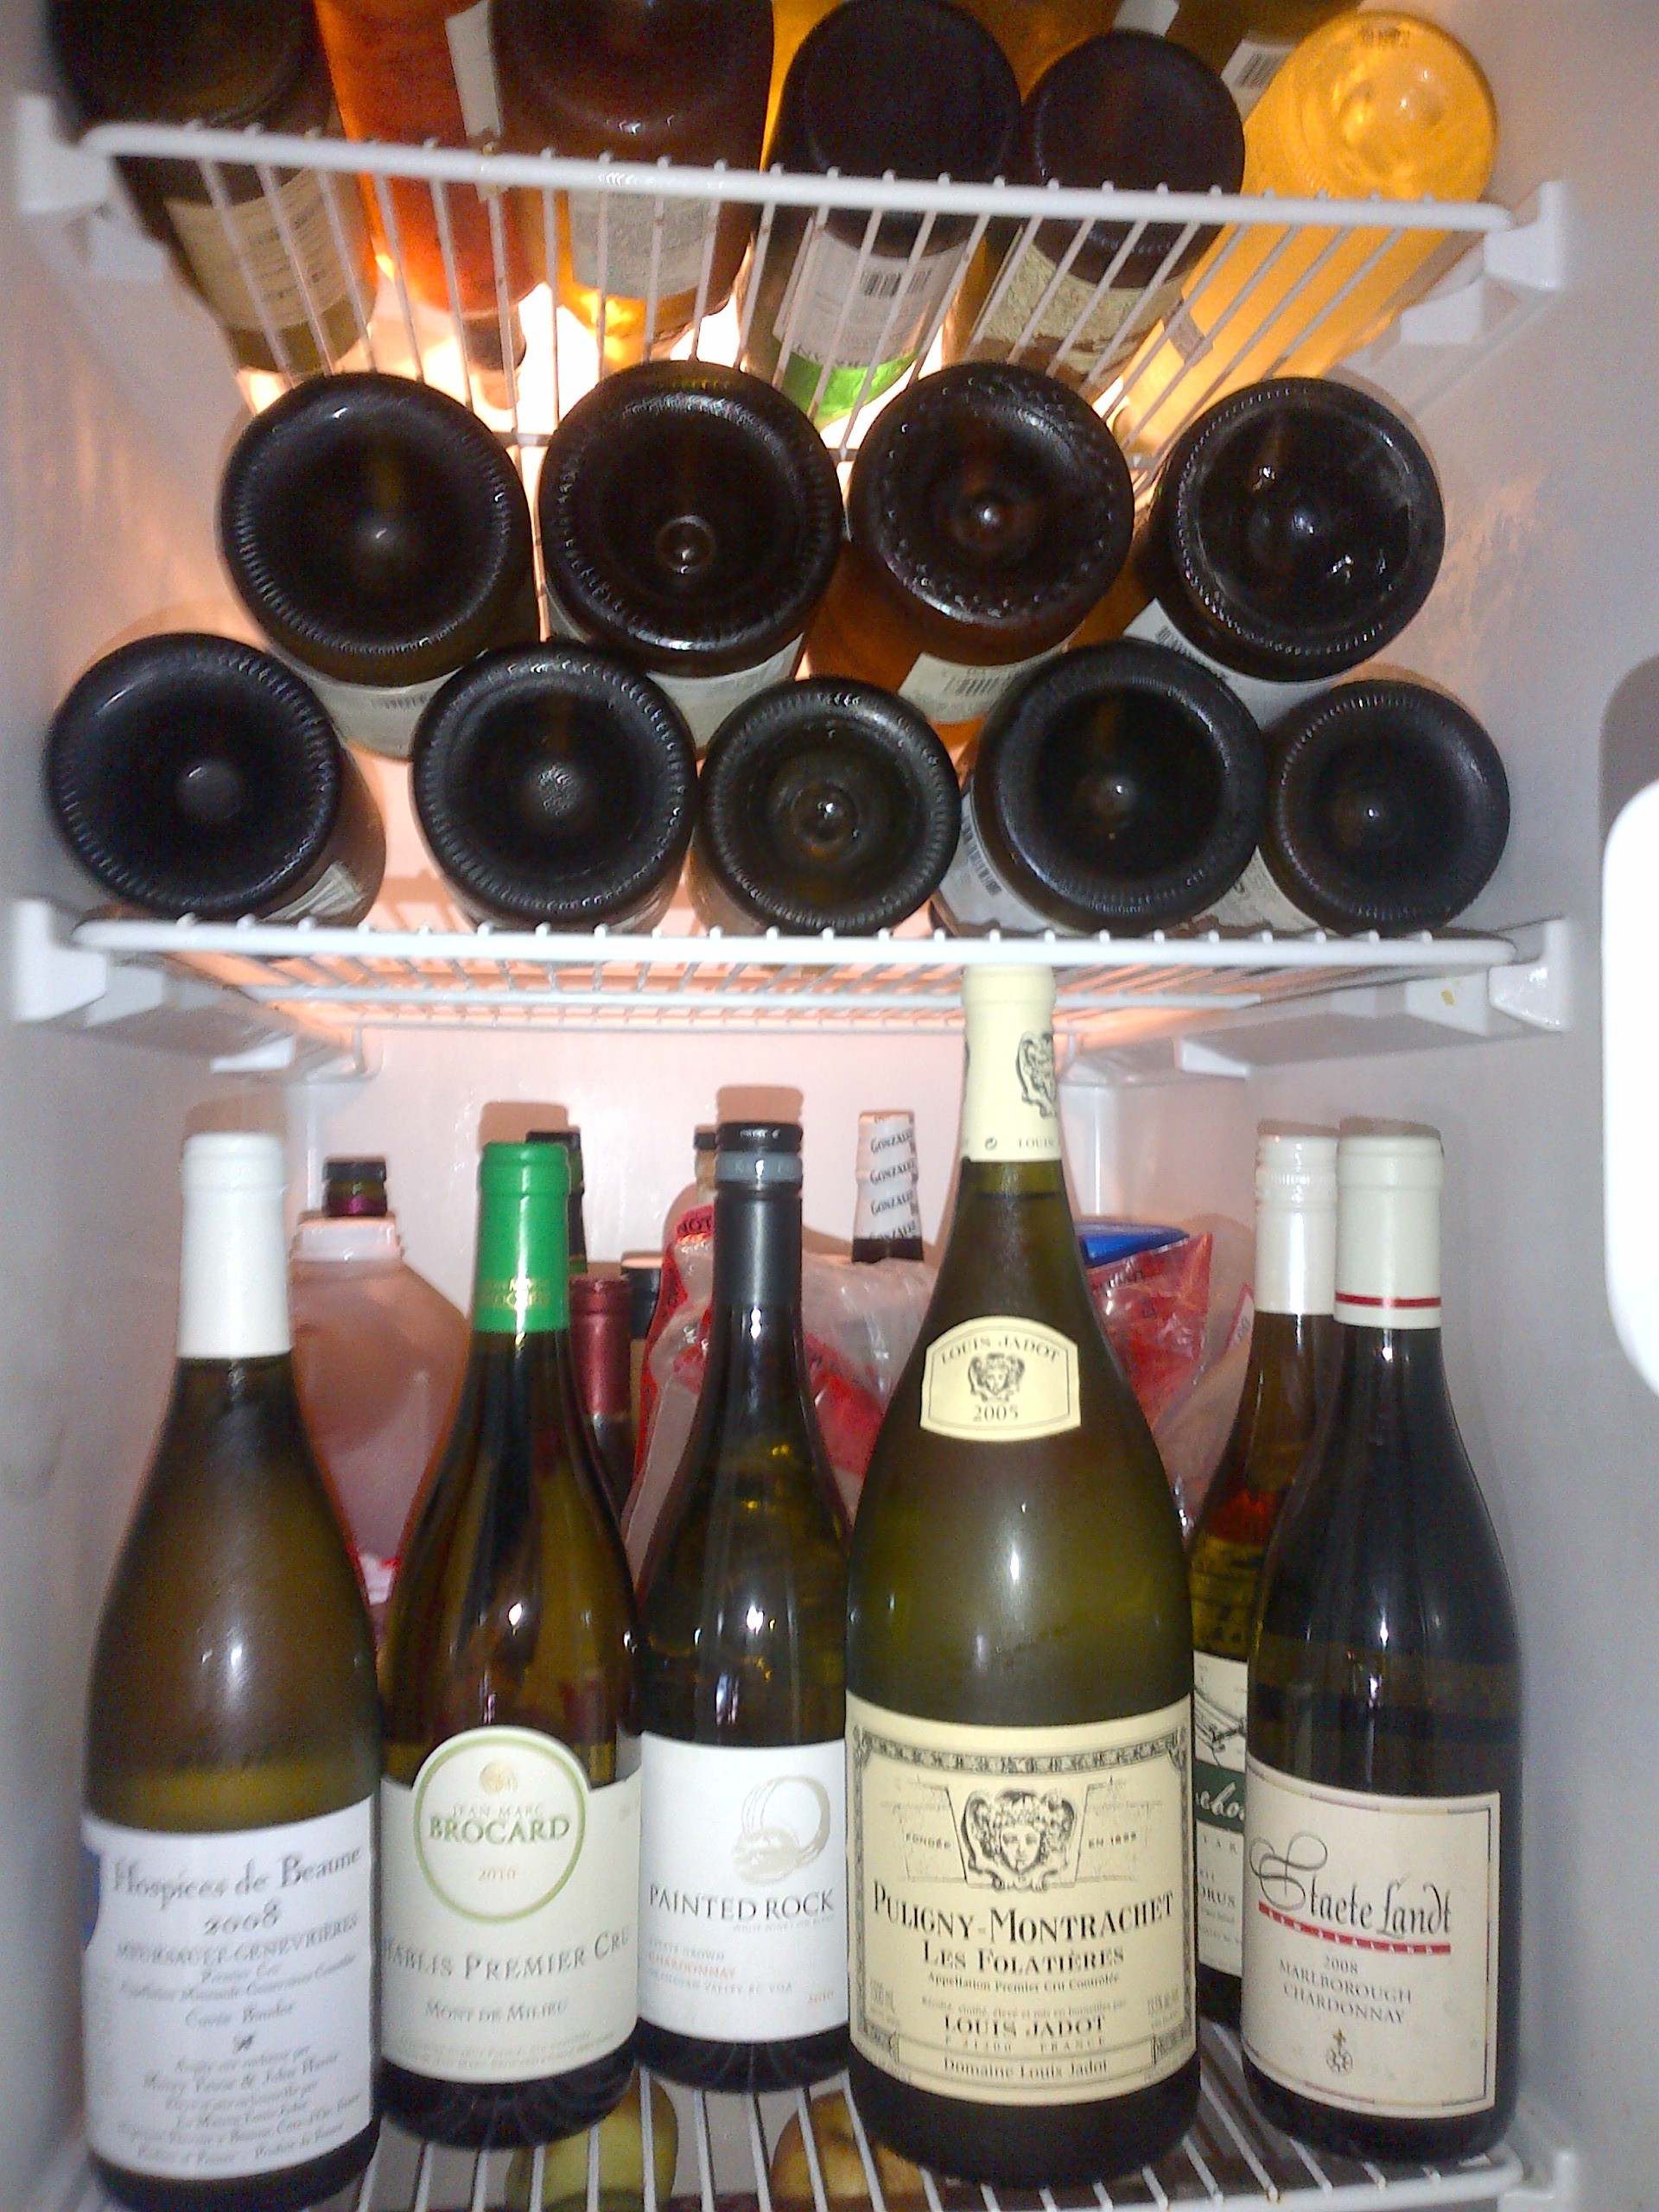  Chardonnay-stocked fridge for the afterparty...  